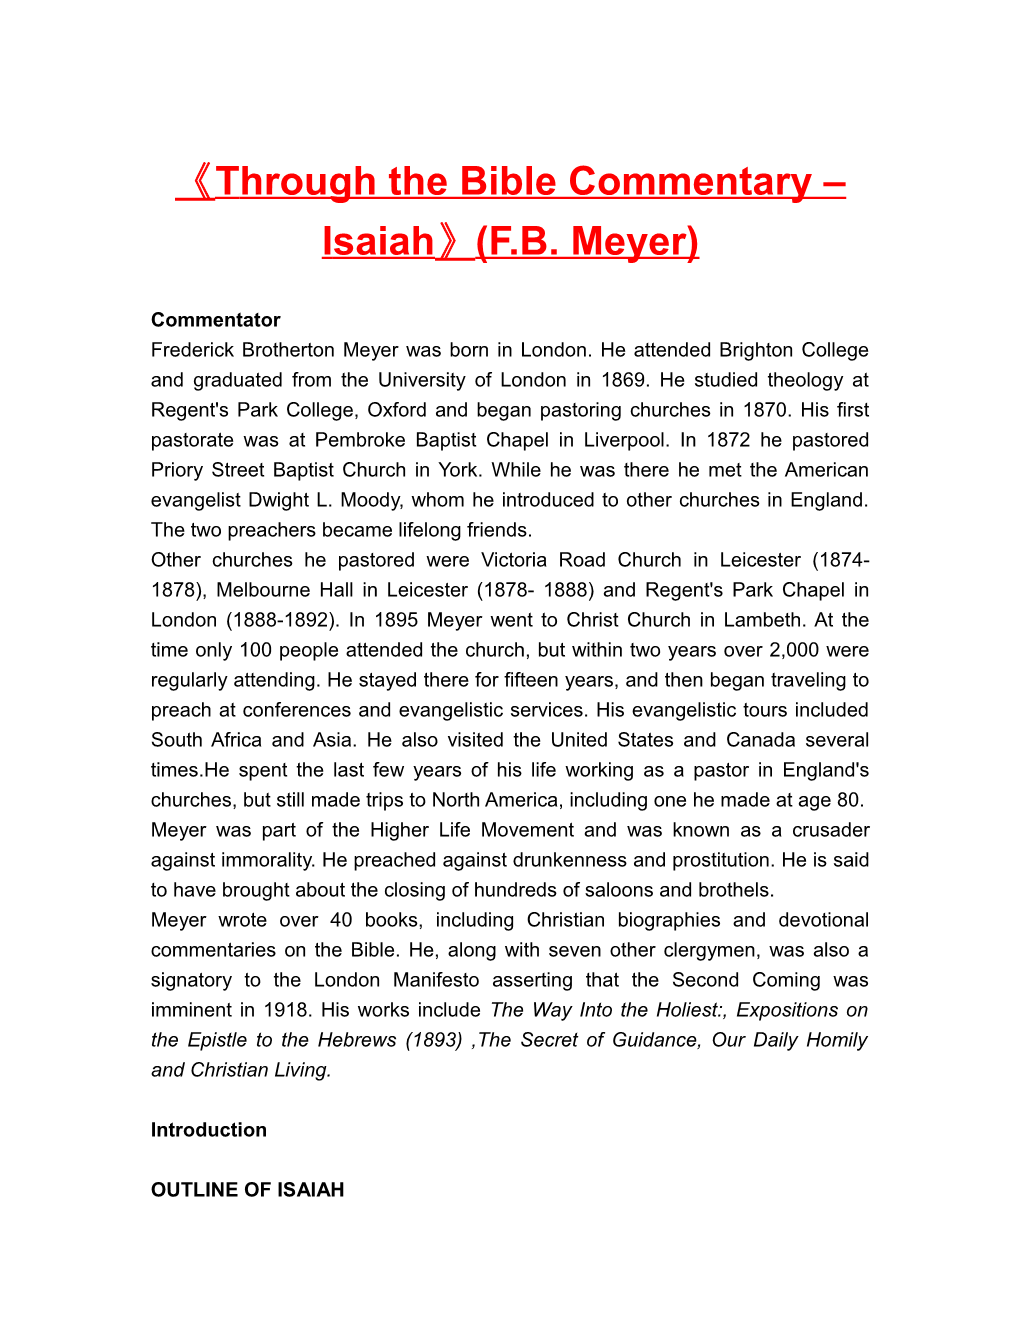 Through the Bible Commentary Isaiah (F.B. Meyer)